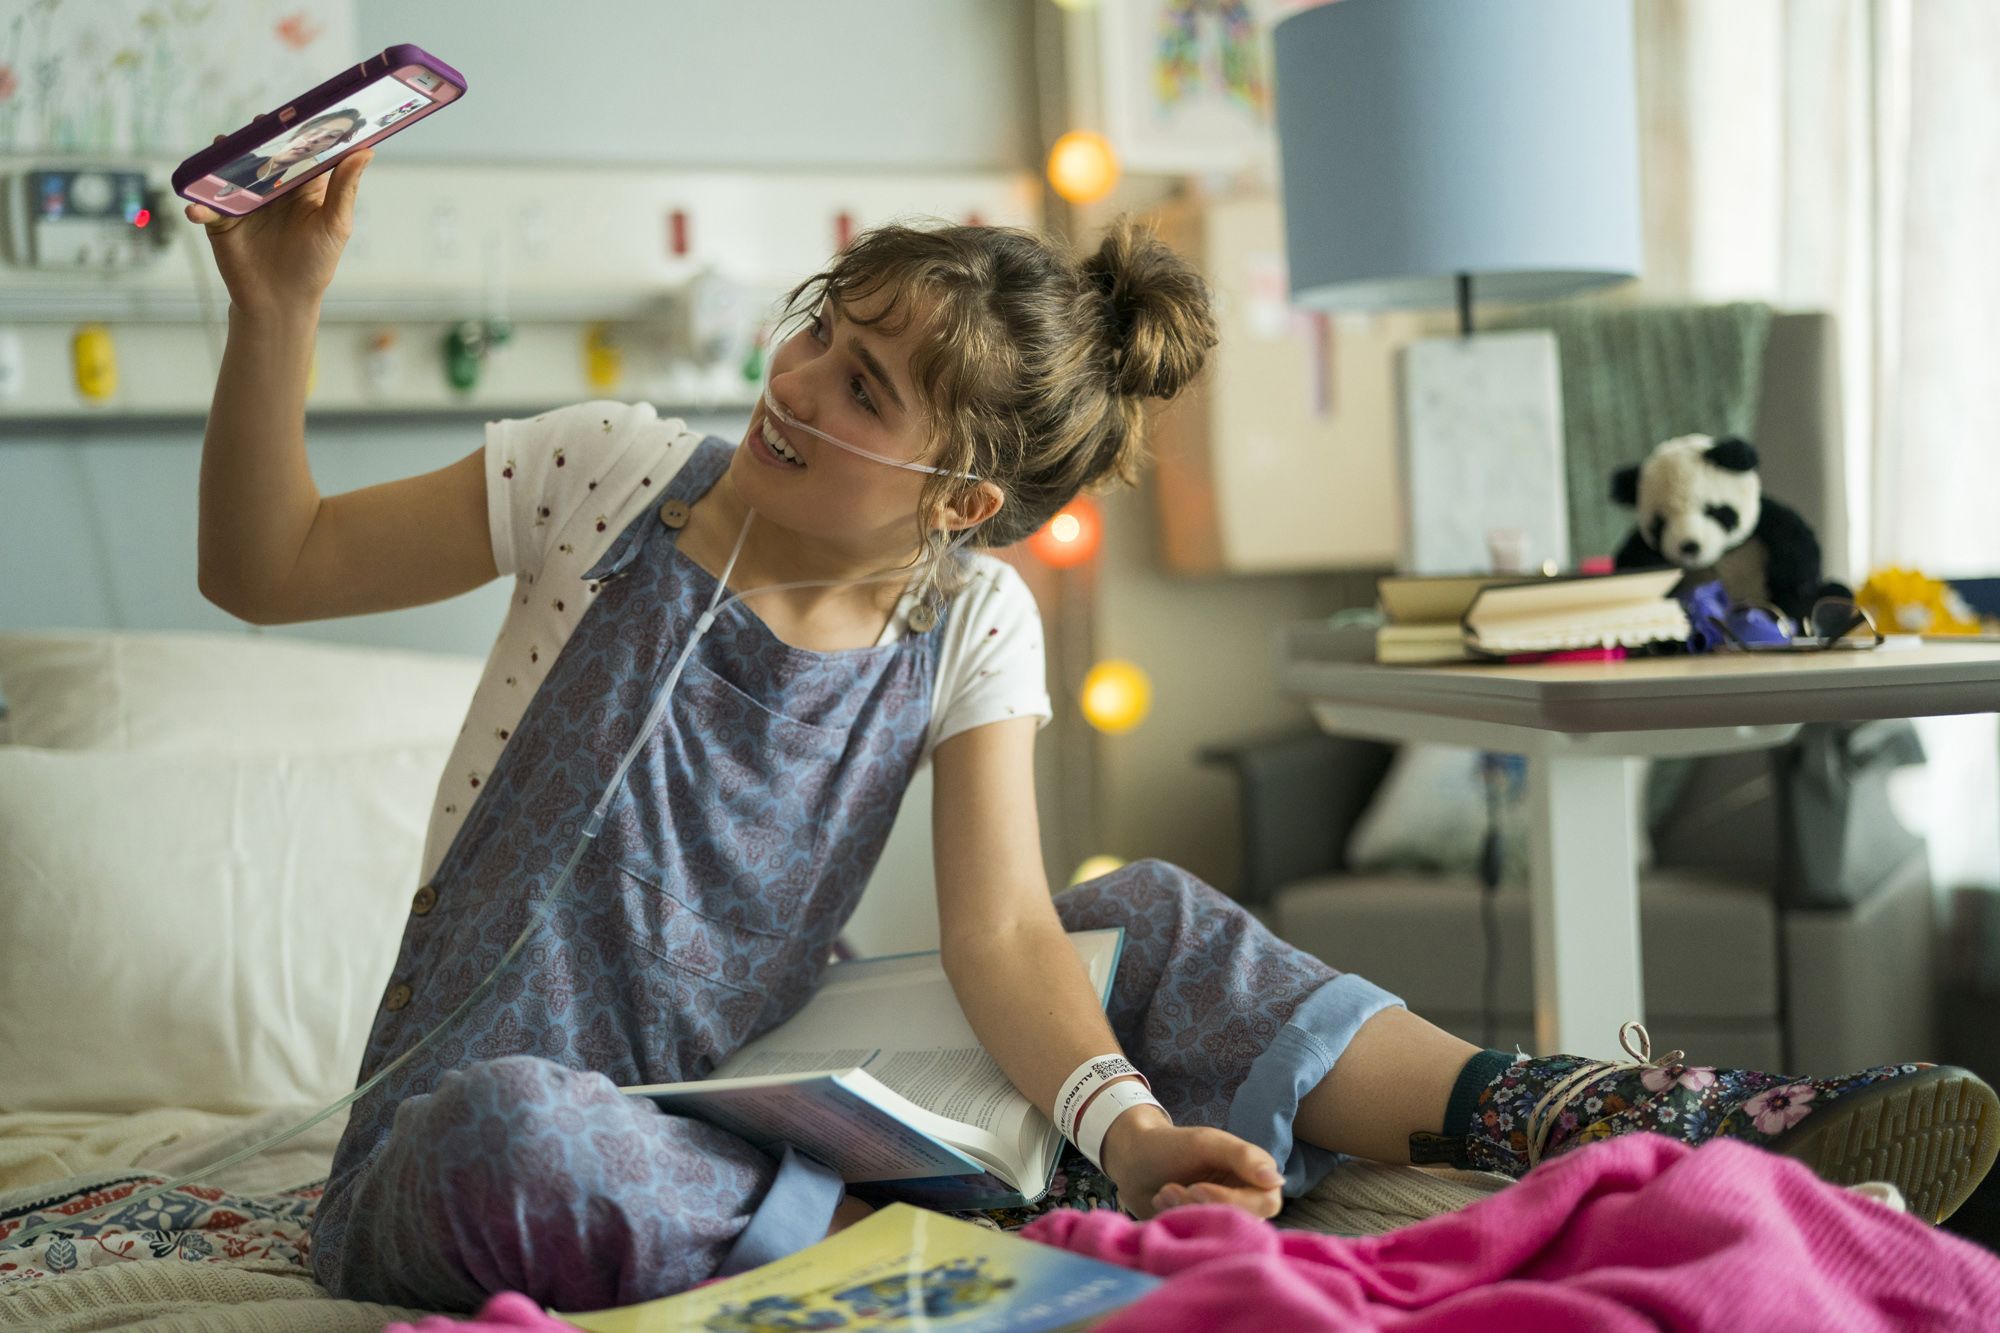 Five Feet Apart' Review: Ailing Teenagers Live Dangerously for